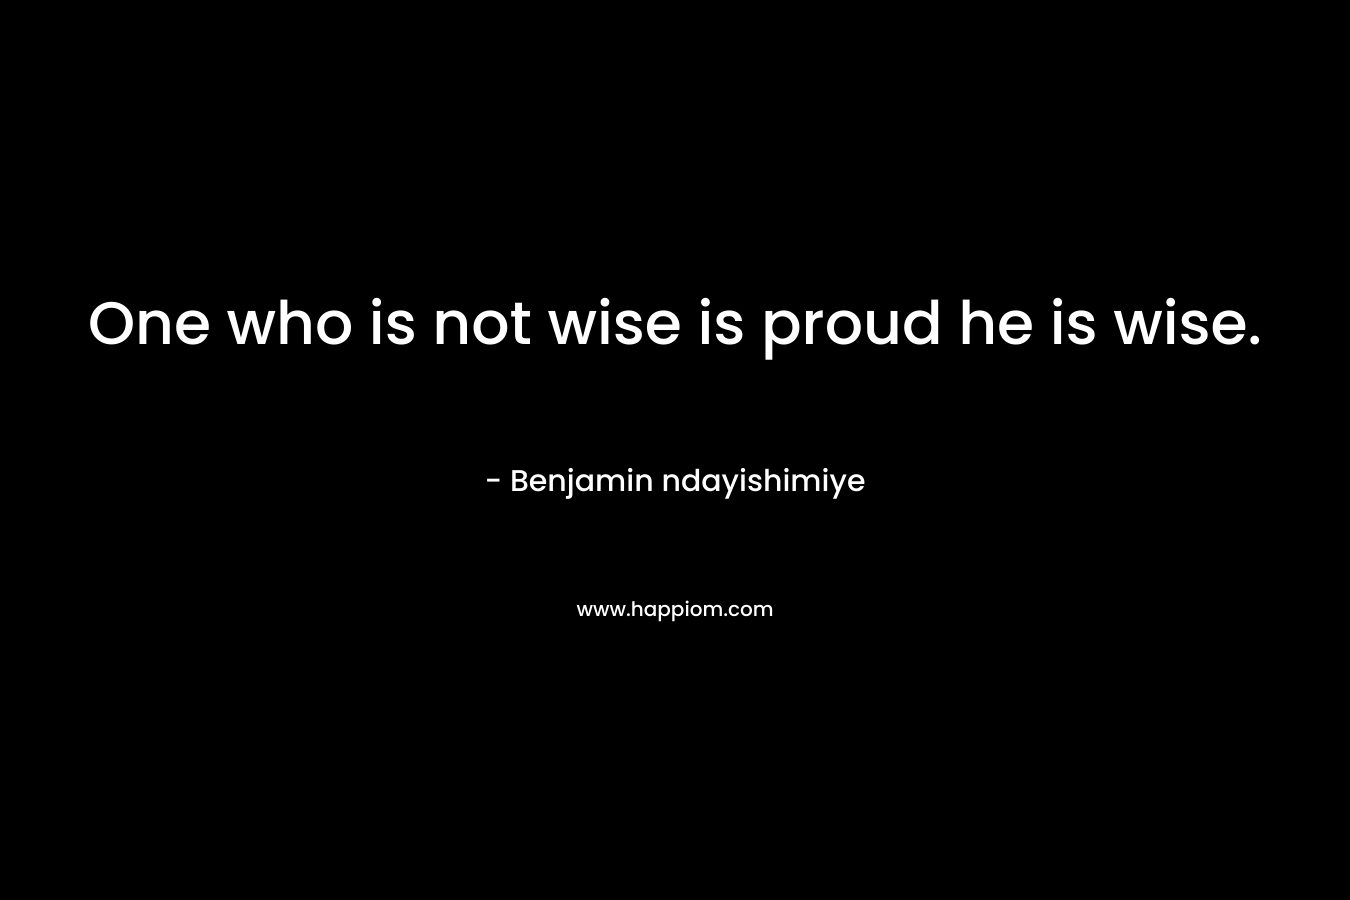 One who is not wise is proud he is wise.